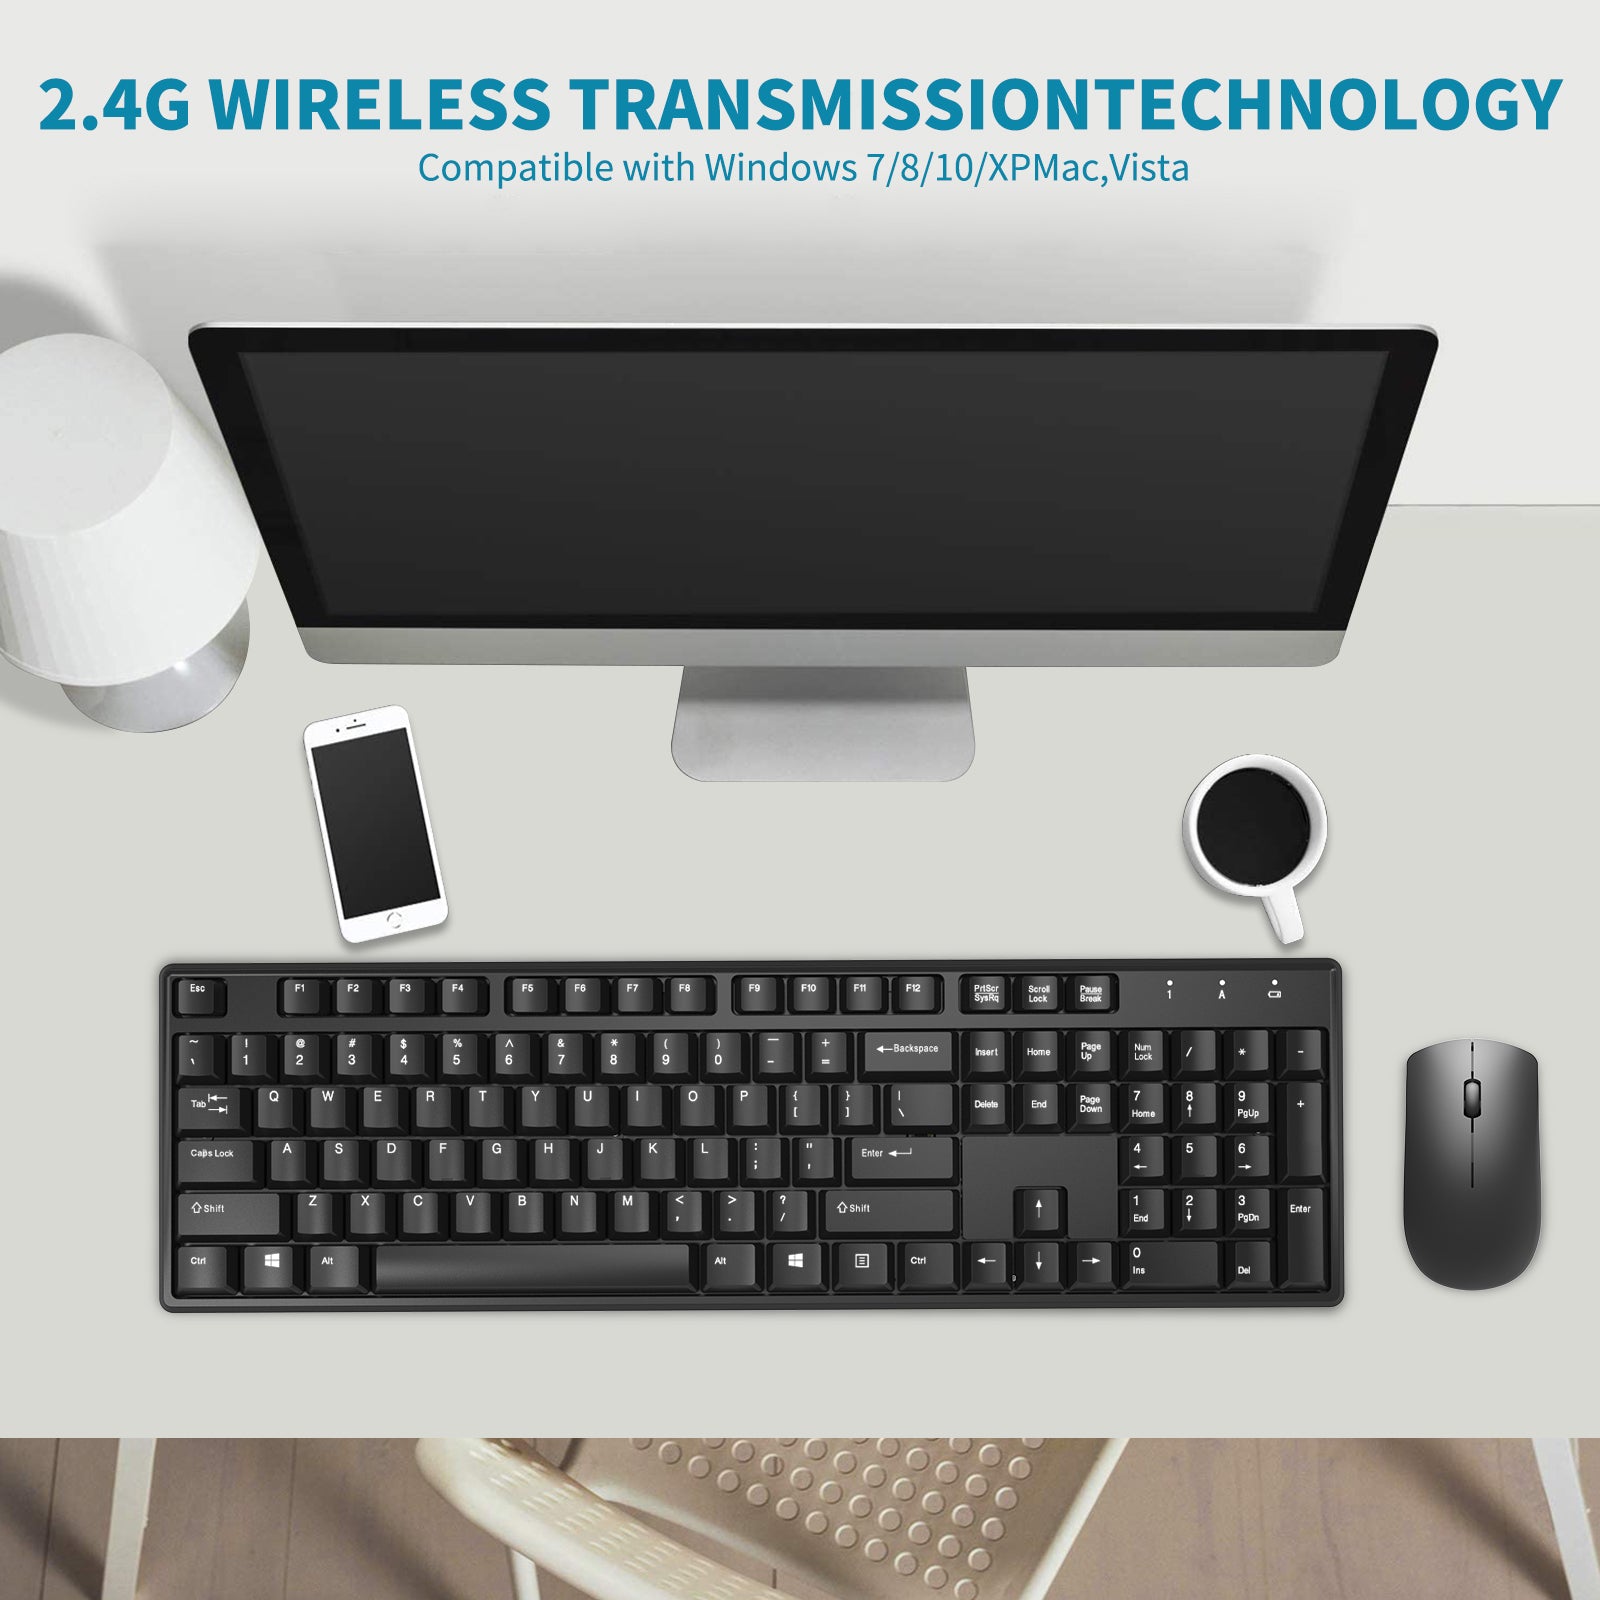 Giecy Wireless Keyboard and Mouse Combo 2.4G Wireless Full Size Slim Keyboard, Low Power Mouse and Keyboard Ergonomic，for Windows PC, Laptop - Black